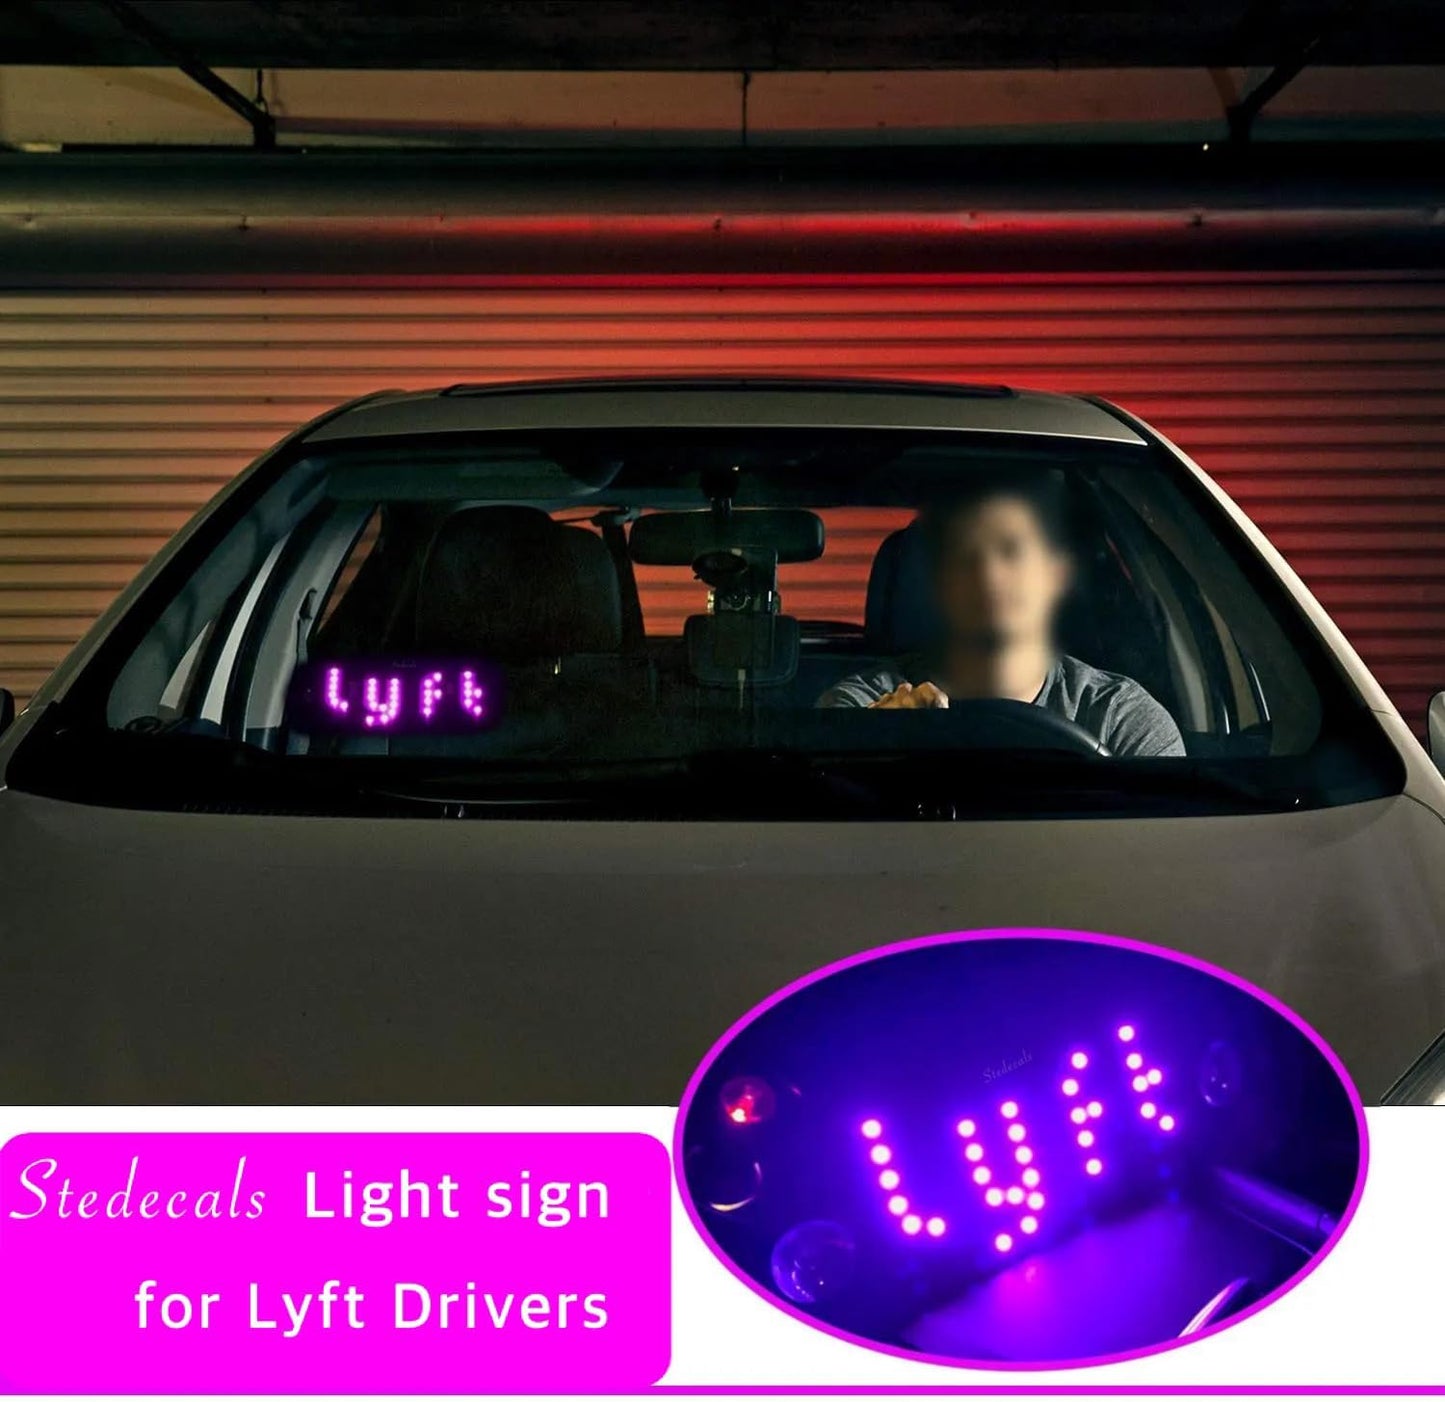 Impressive Light Sign Intended for Lyf t Drivers. This Sign is not Sold by Lyf t